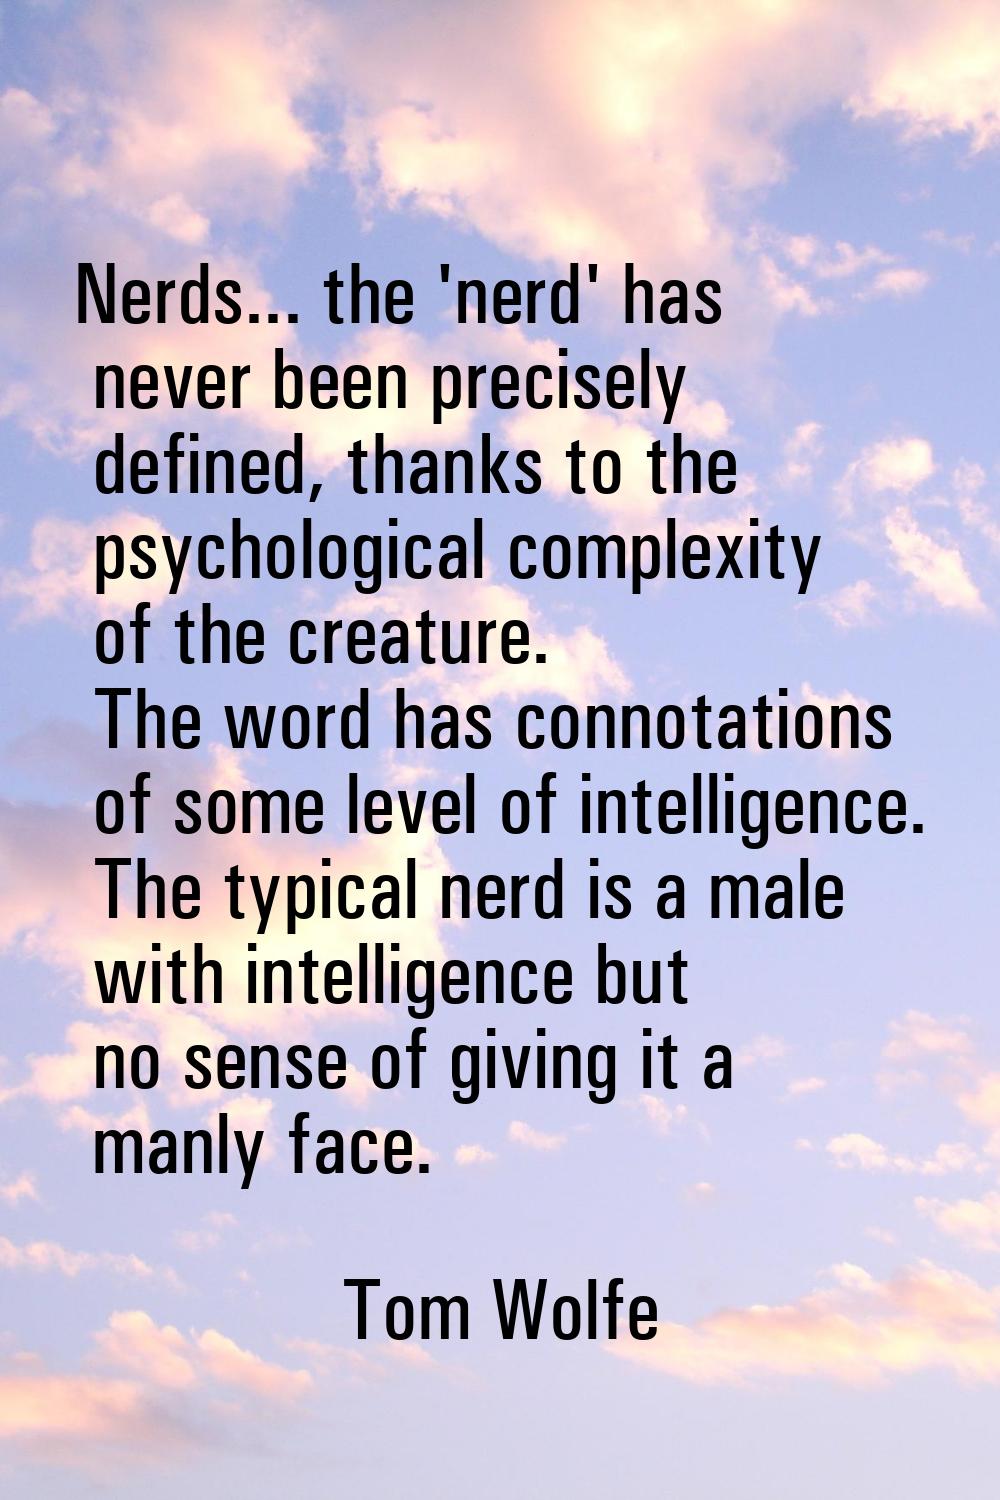 Nerds... the 'nerd' has never been precisely defined, thanks to the psychological complexity of the